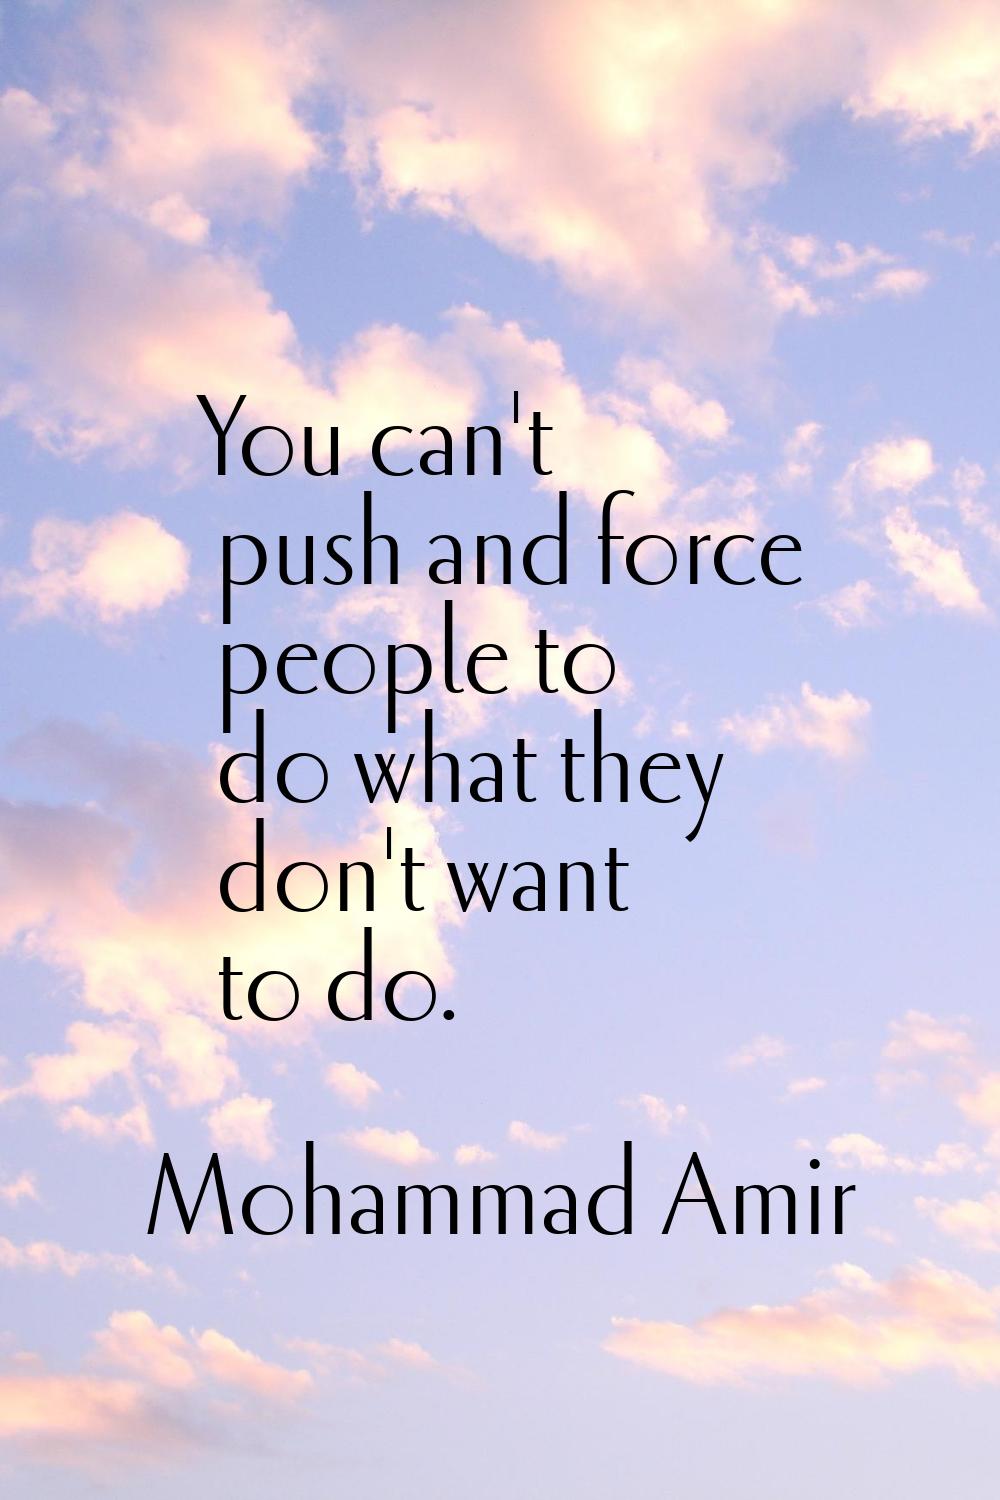 You can't push and force people to do what they don't want to do.